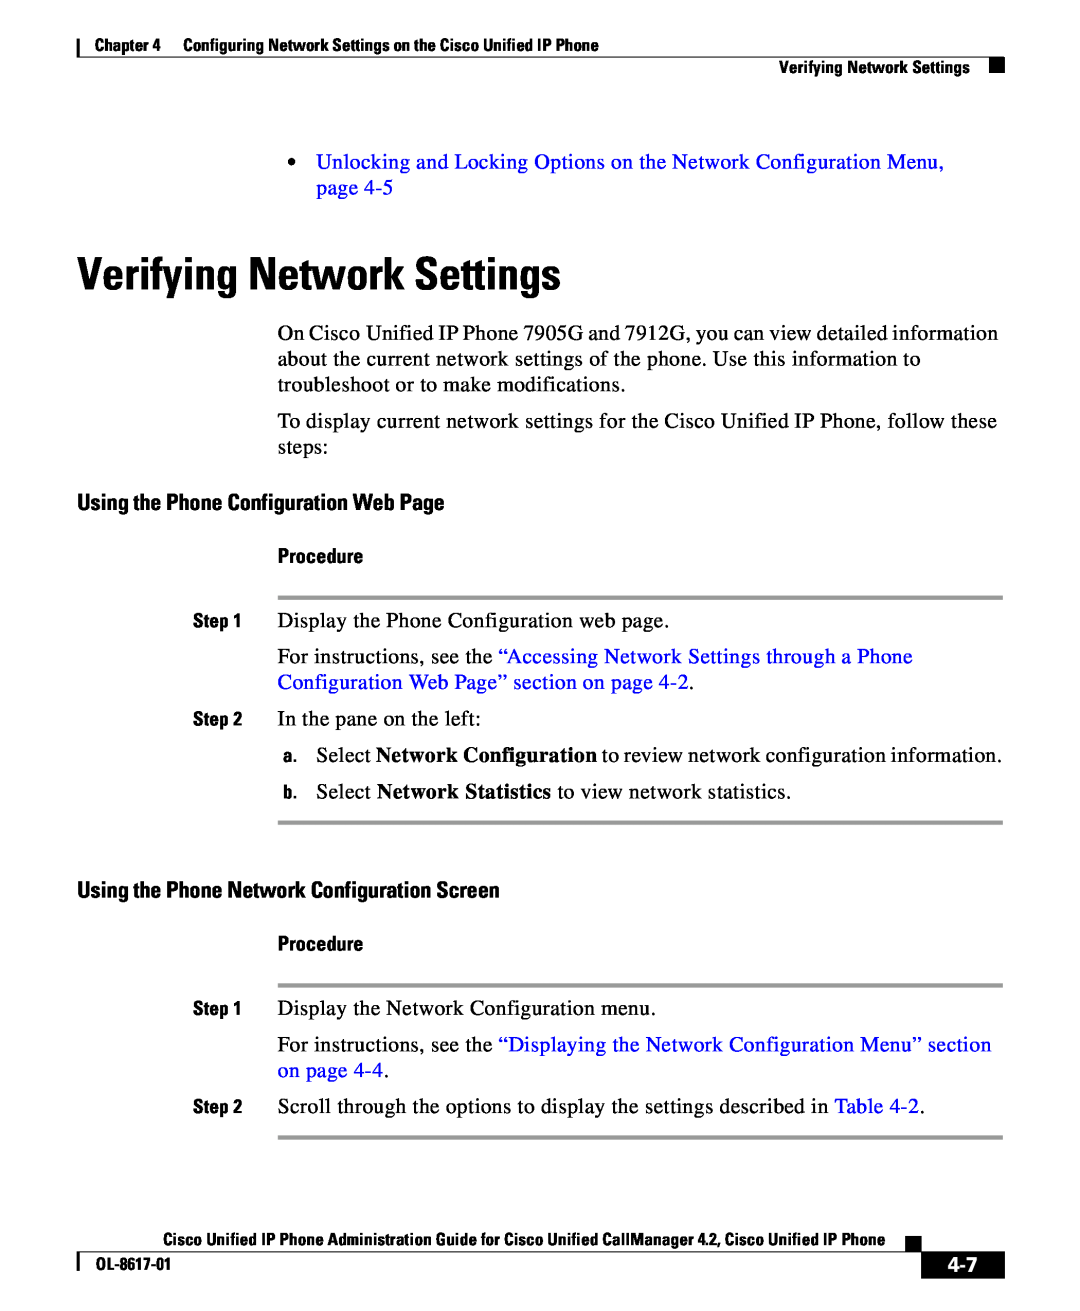 Cisco Systems 4.2 manual Verifying Network Settings, Using the Phone Configuration Web Page, Procedure 